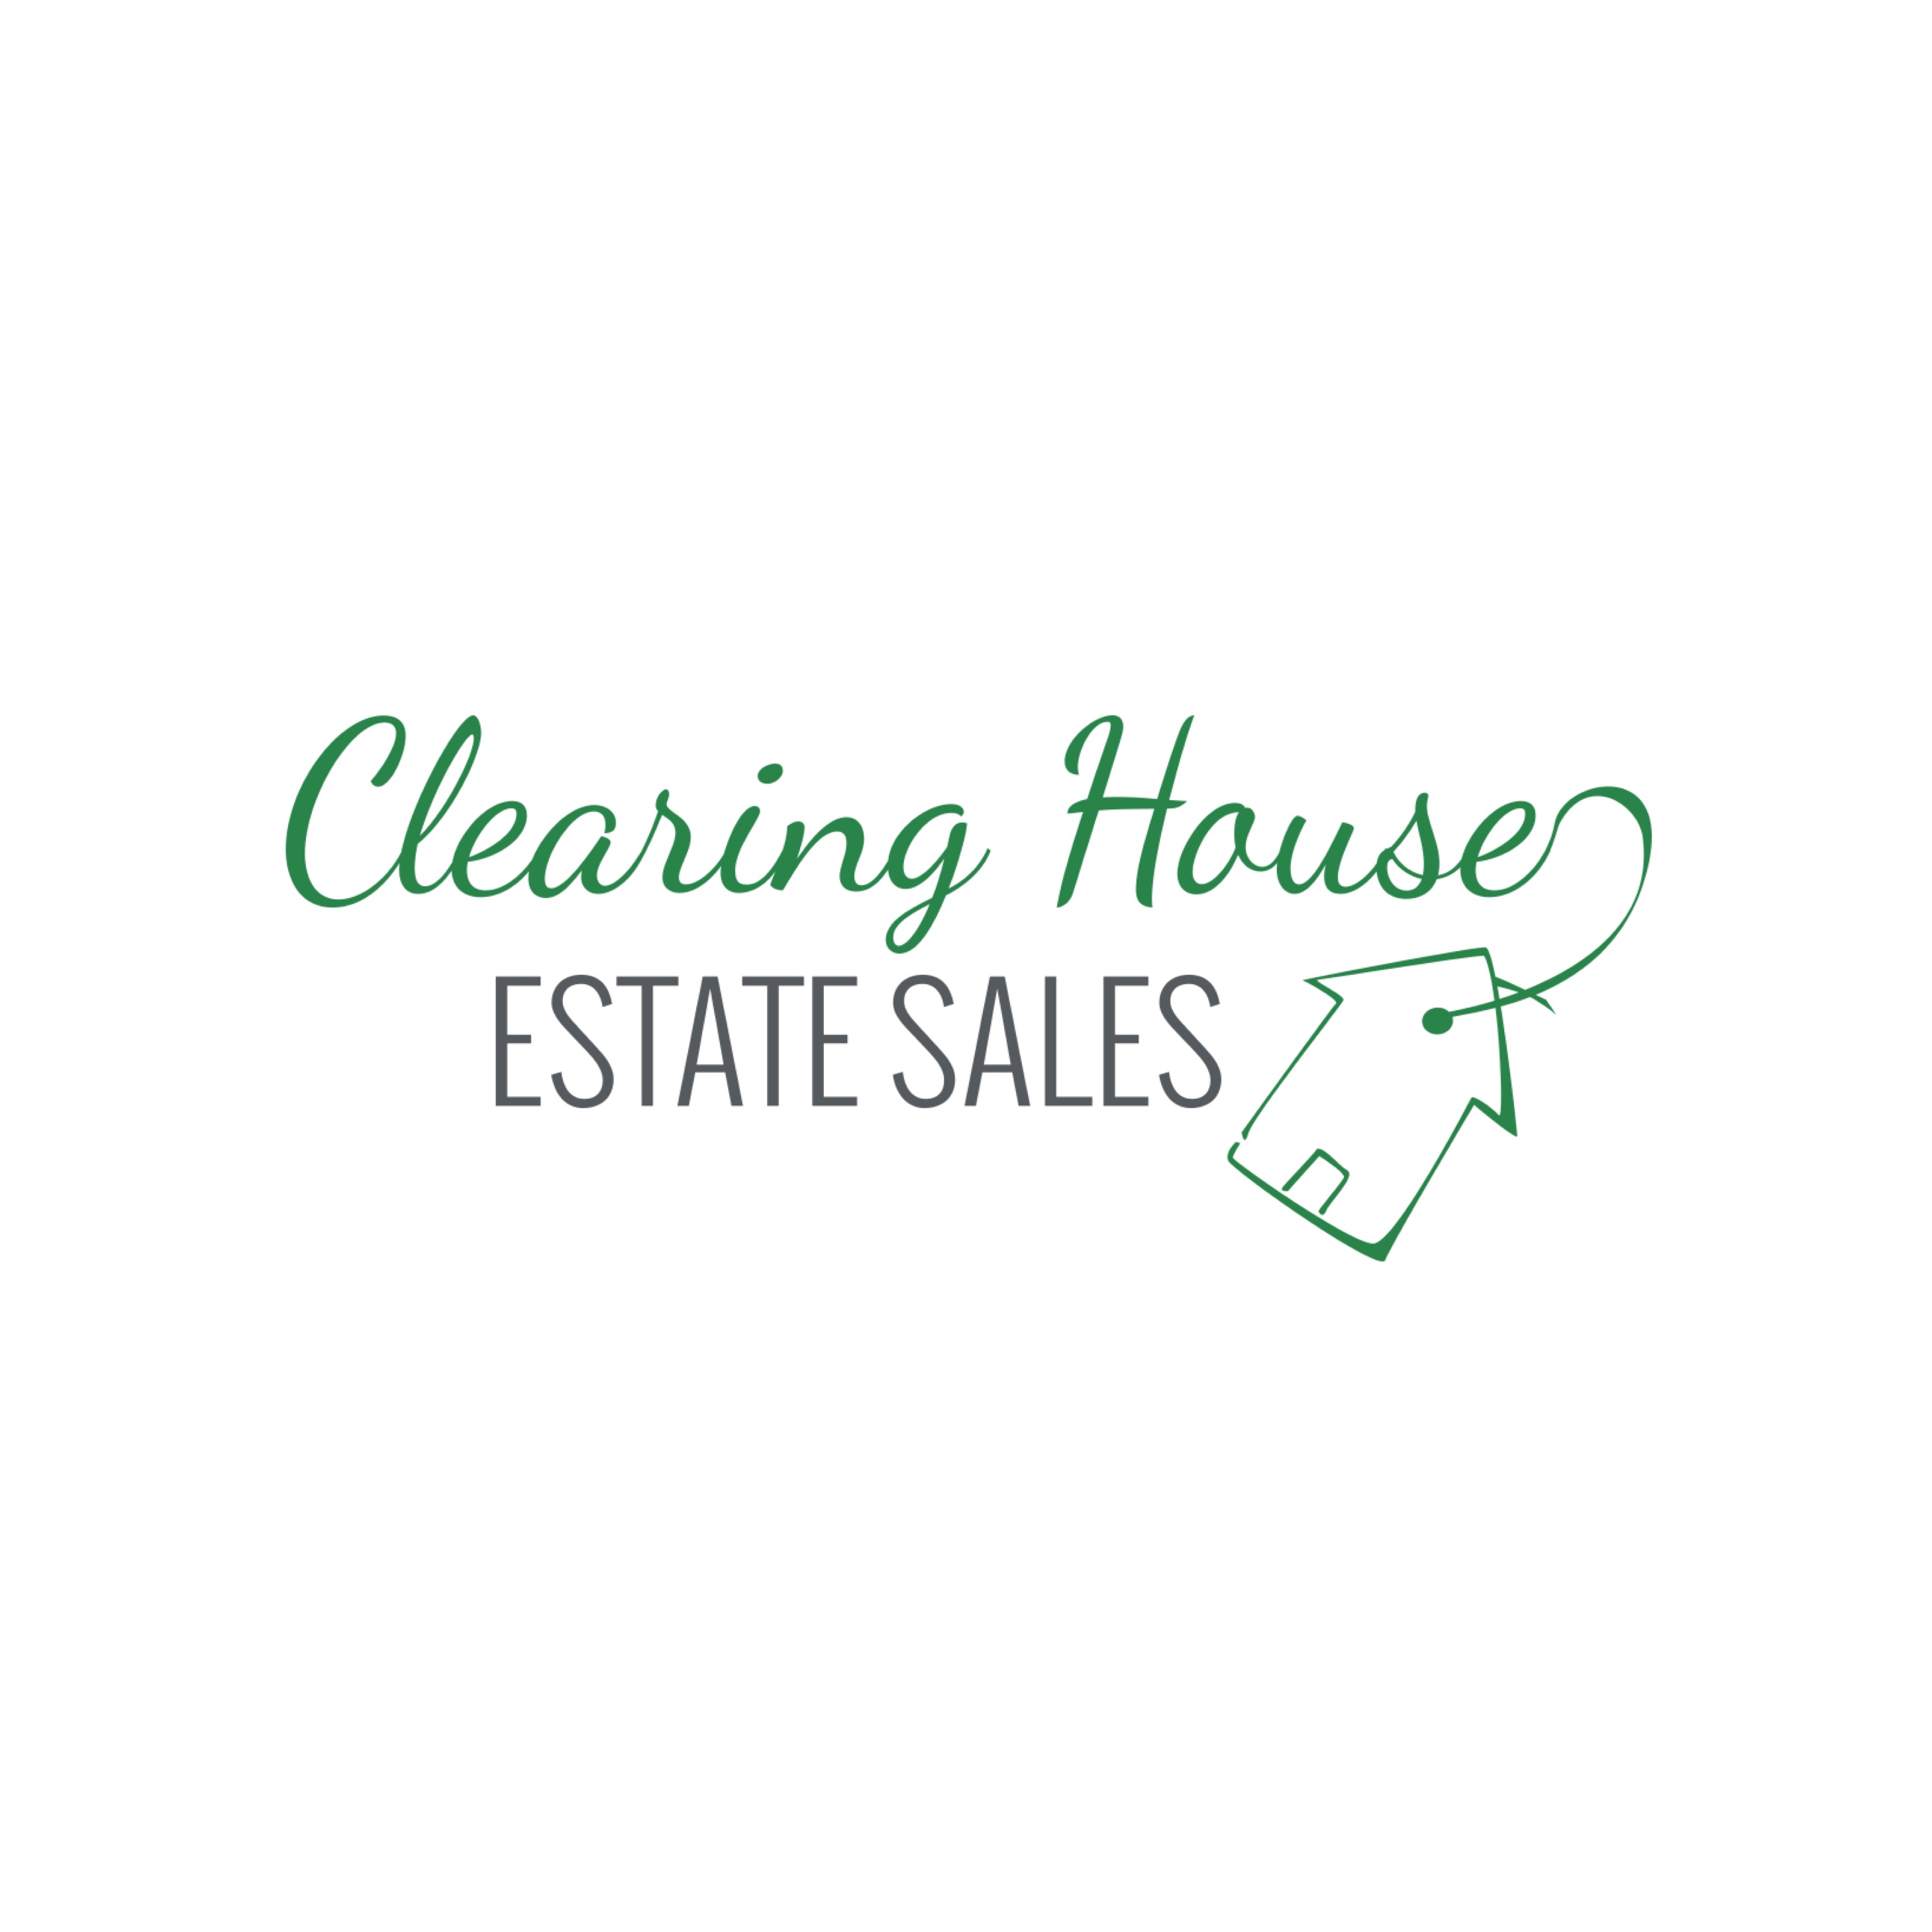 Clearing House Estate Sales - NC | AuctionNinja